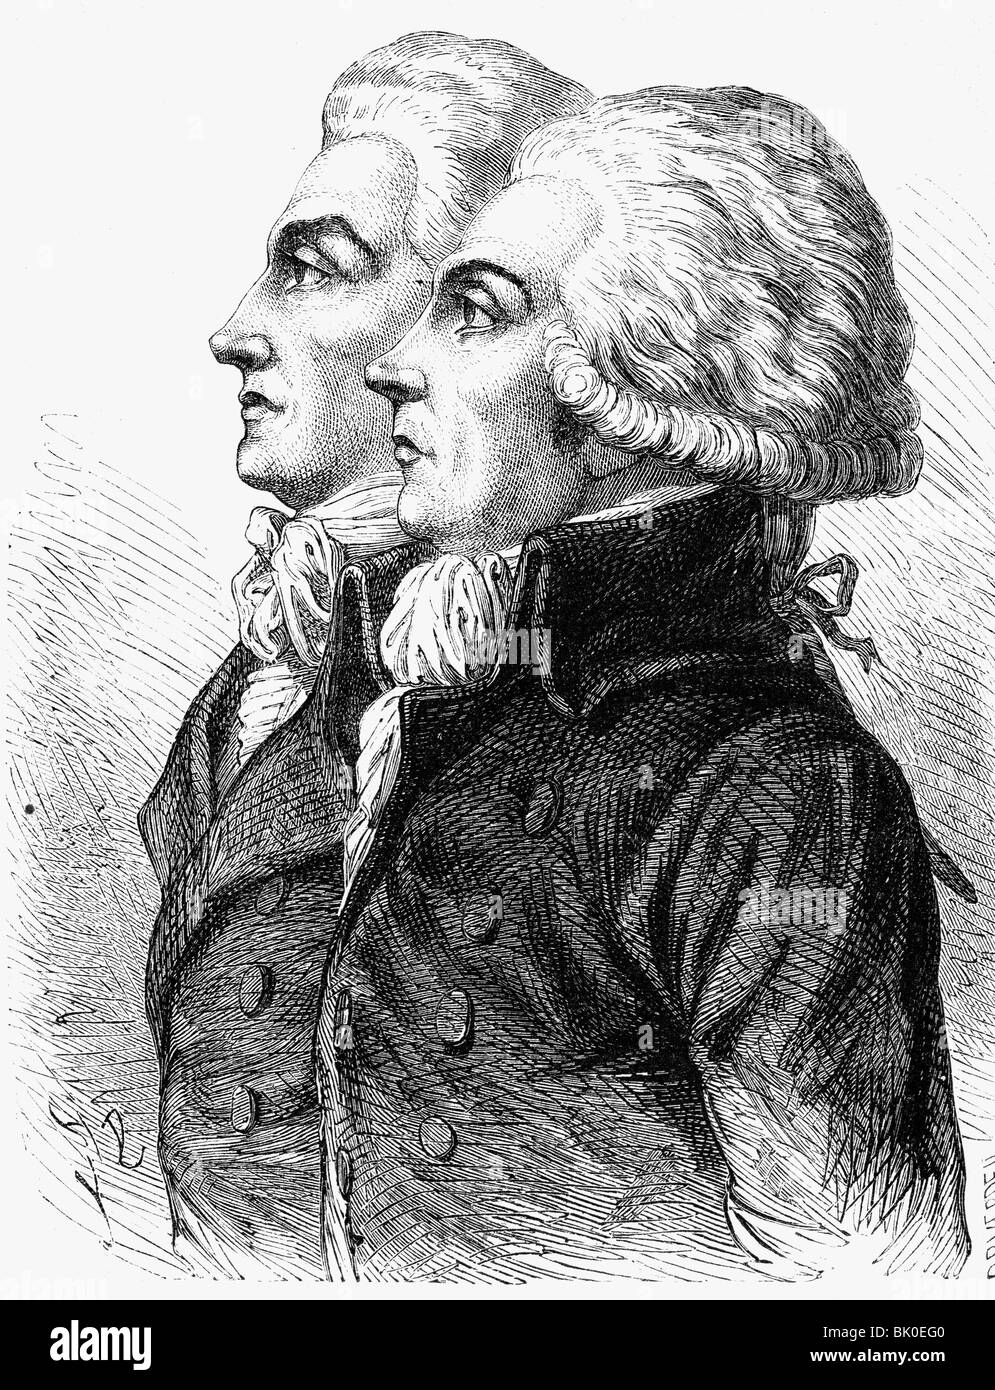 Lameth, Alexandre Theodore Victor de, 20.10.1760 - 28.3.1829, Franch general and politician, with brother Charles, portrait, wood engraving, 19th century, , Stock Photo